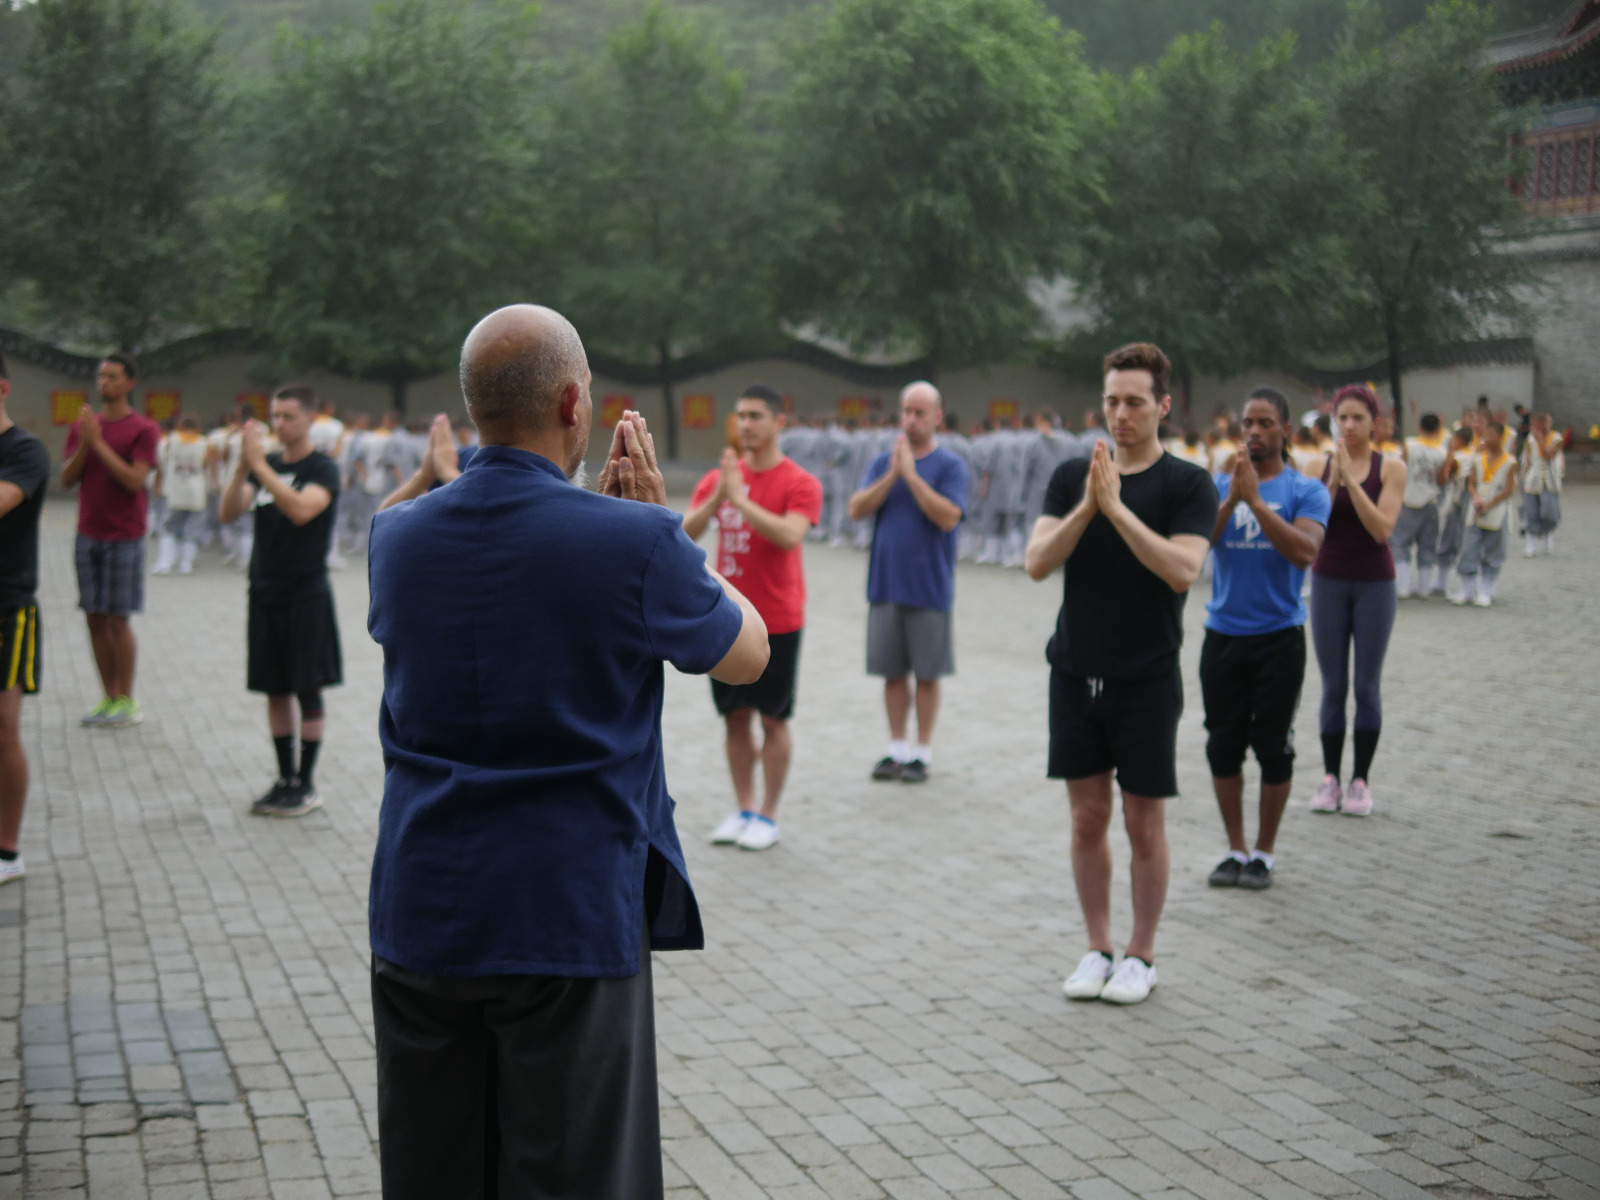 shifu in blue shirt in front of a group of people hands together